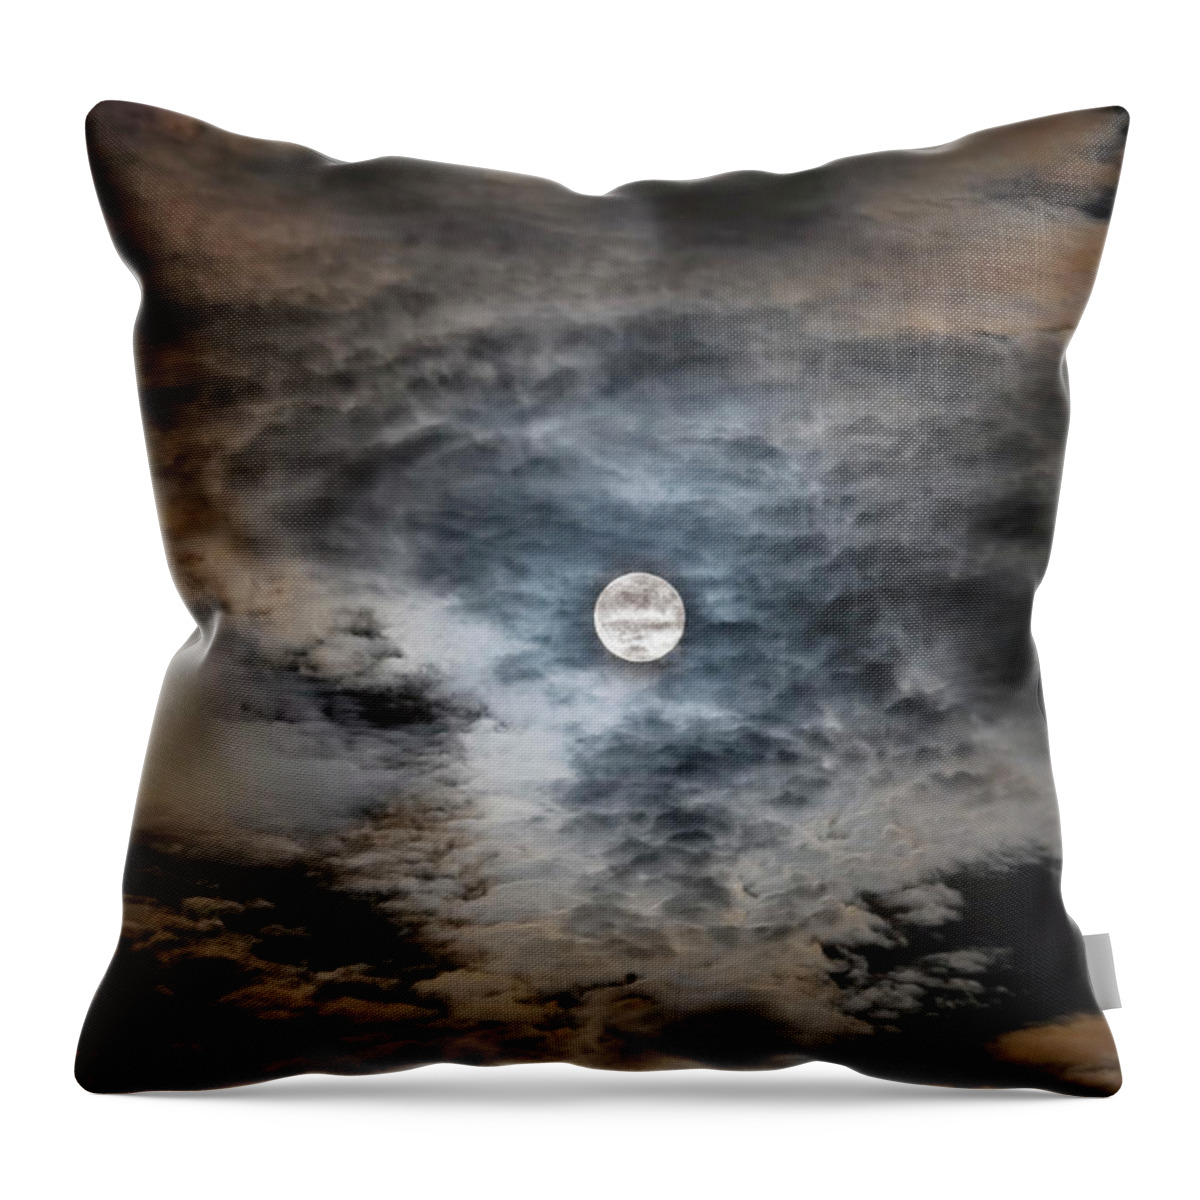 Spooky Throw Pillow featuring the photograph August 28, 2007 - Full Moon In Clouds by Alan Dyer/stocktrek Images